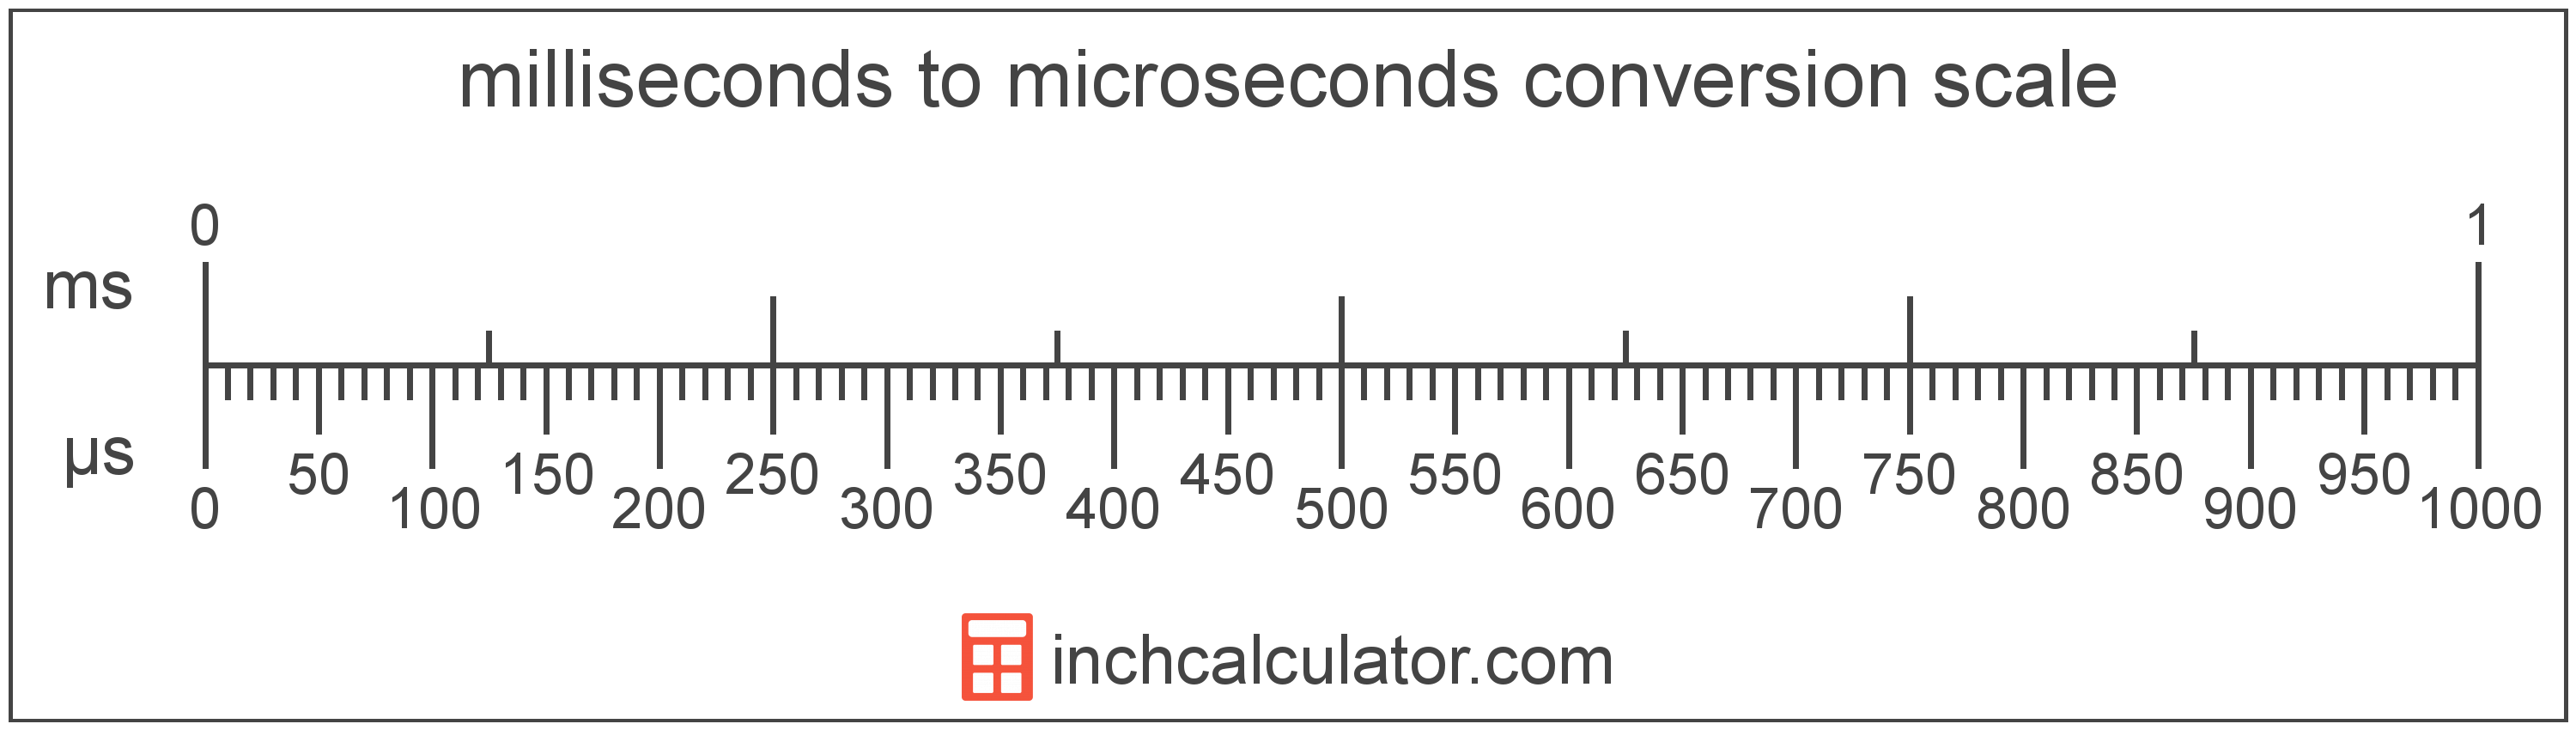 Microseconds To Milliseconds Conversion µs To Ms